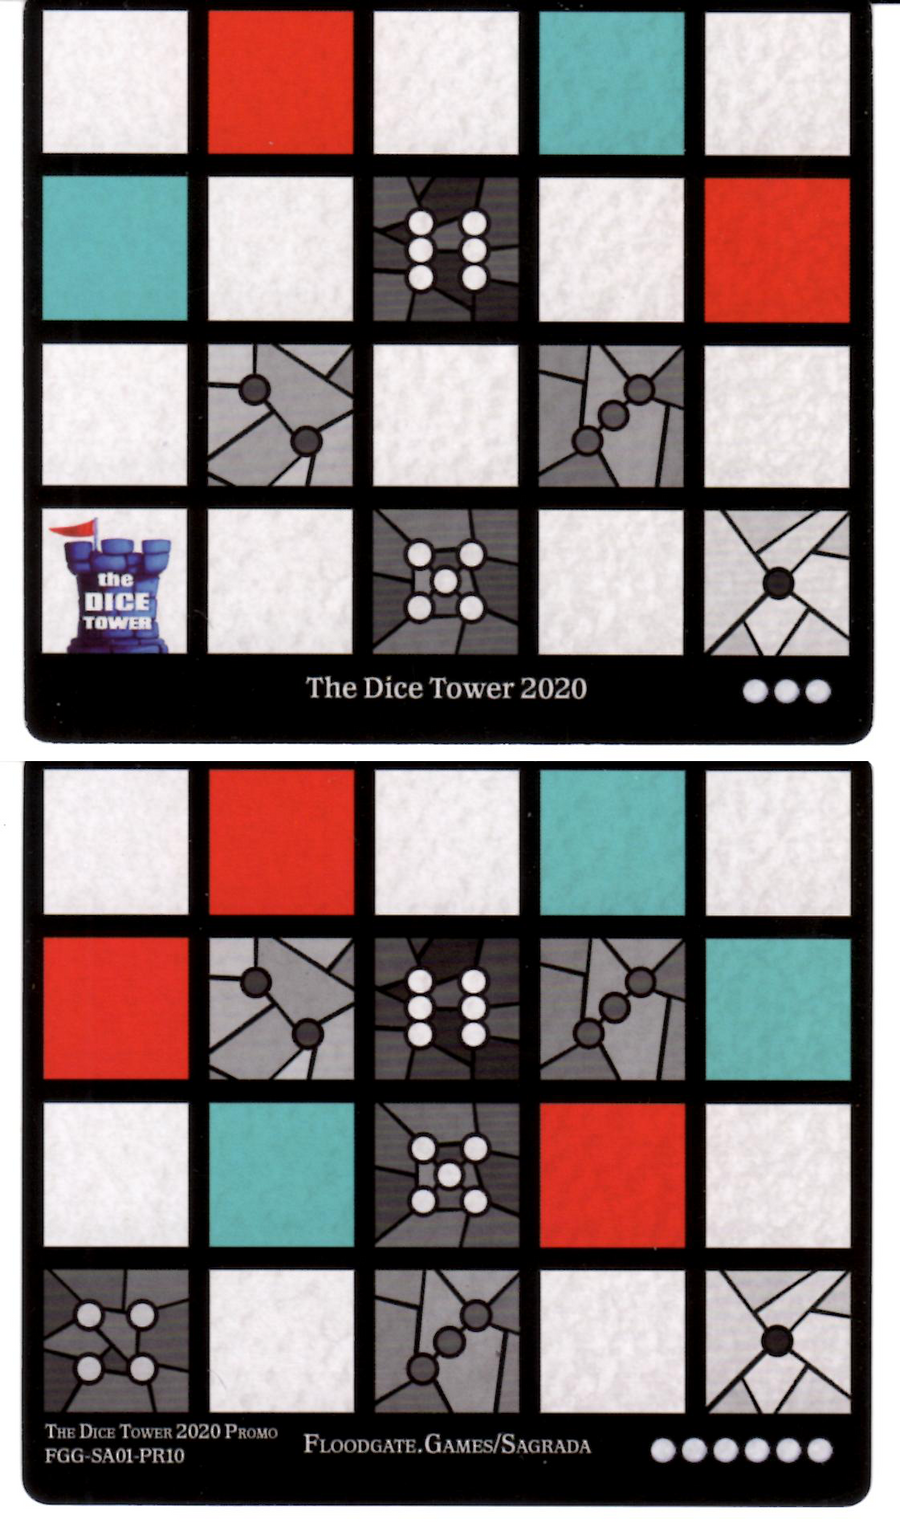 Sagrada: Promo 10 Window Pattern Card for use with the board game S, Sagrada, sold at the BoardGameGeek Store